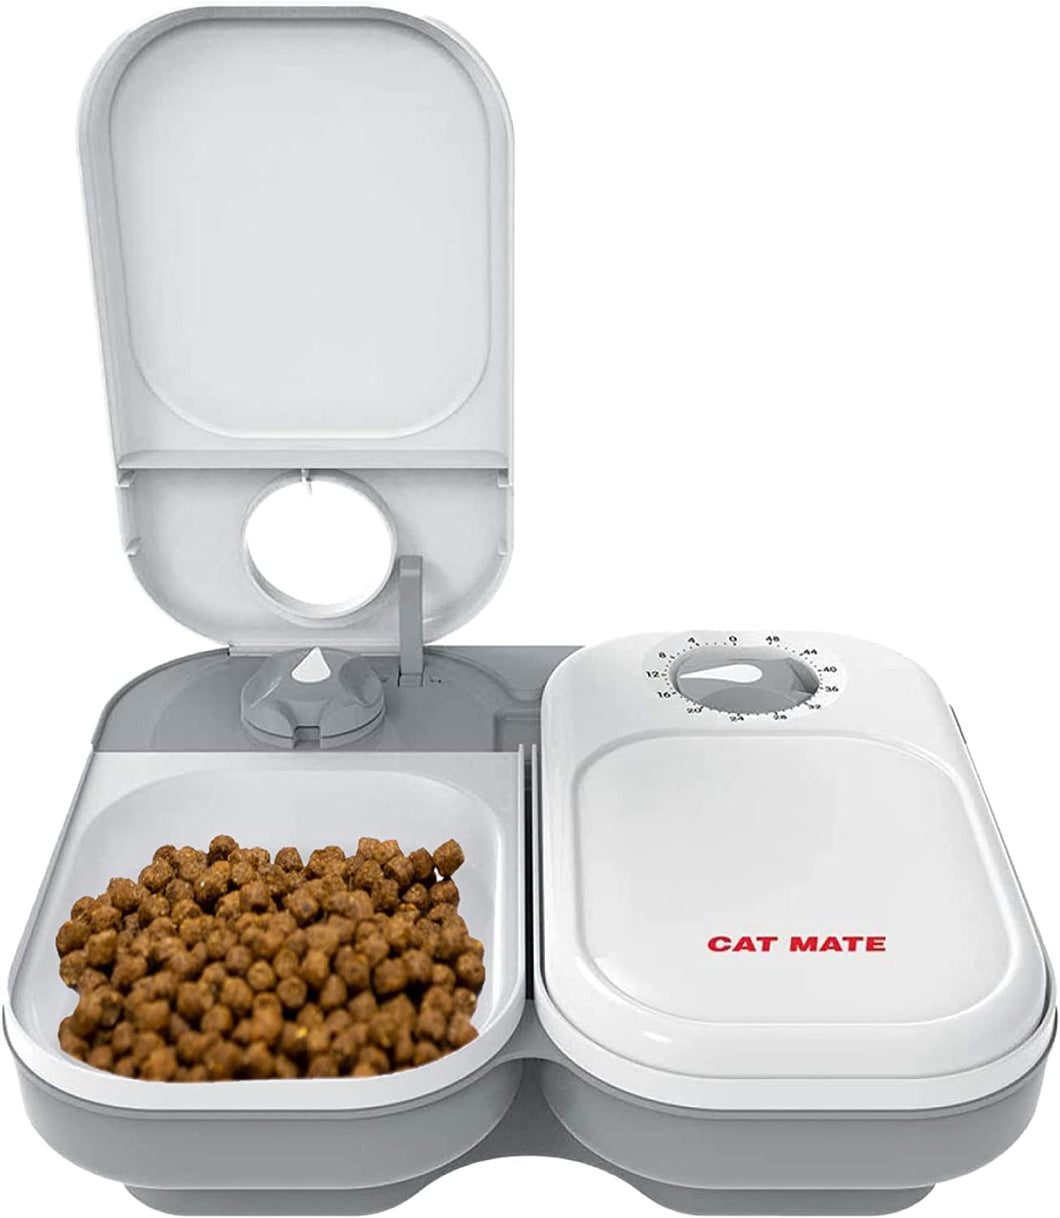 Cat Mate C200 2 Meal Automatic Pet Feeder For Cats And Small Dogs with Ice Pack